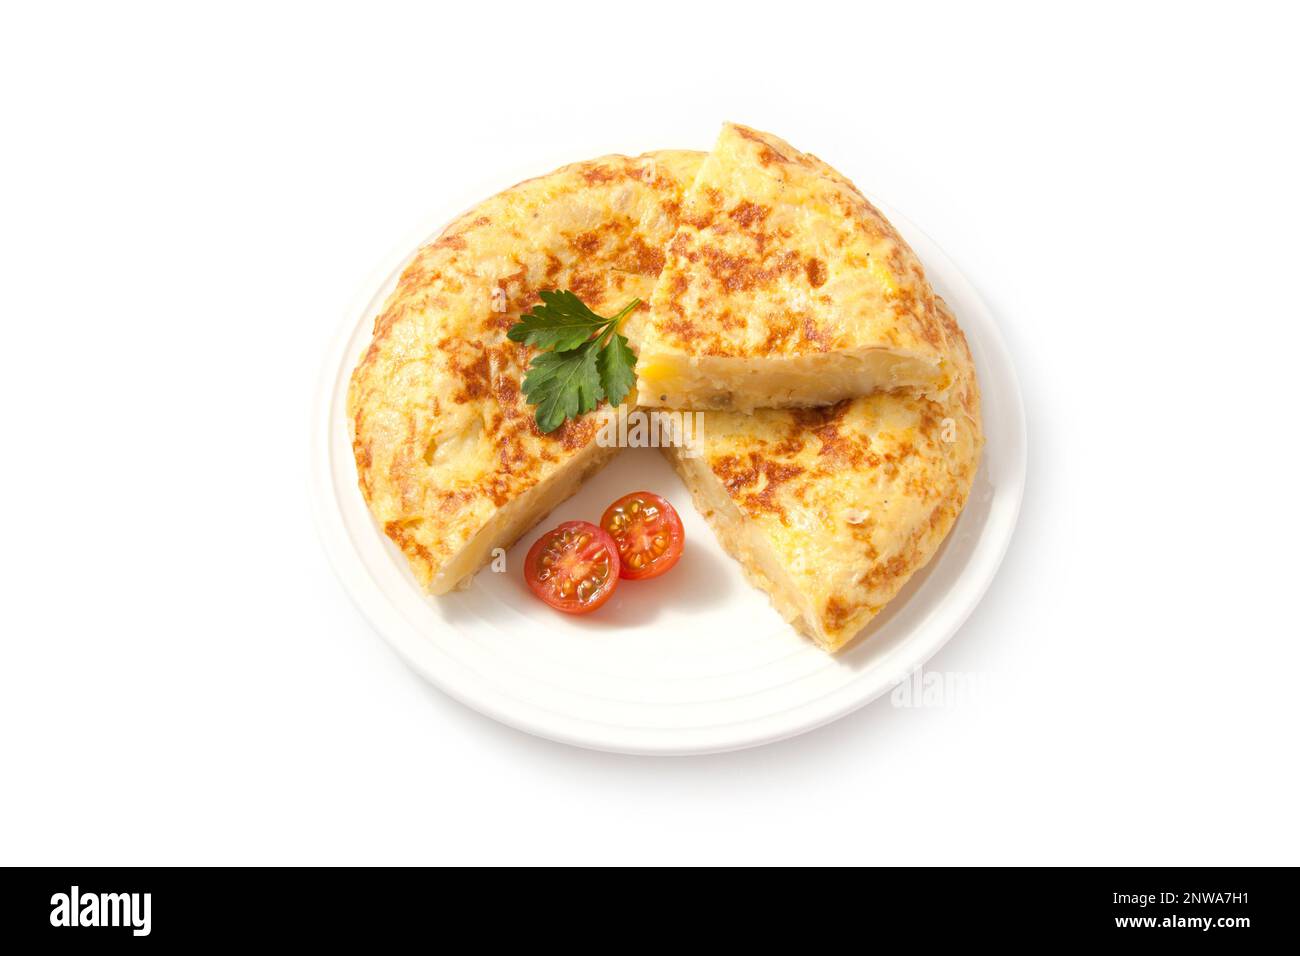 Tortilla española. Spanish omelette with potatoes and onion. Stock Photo